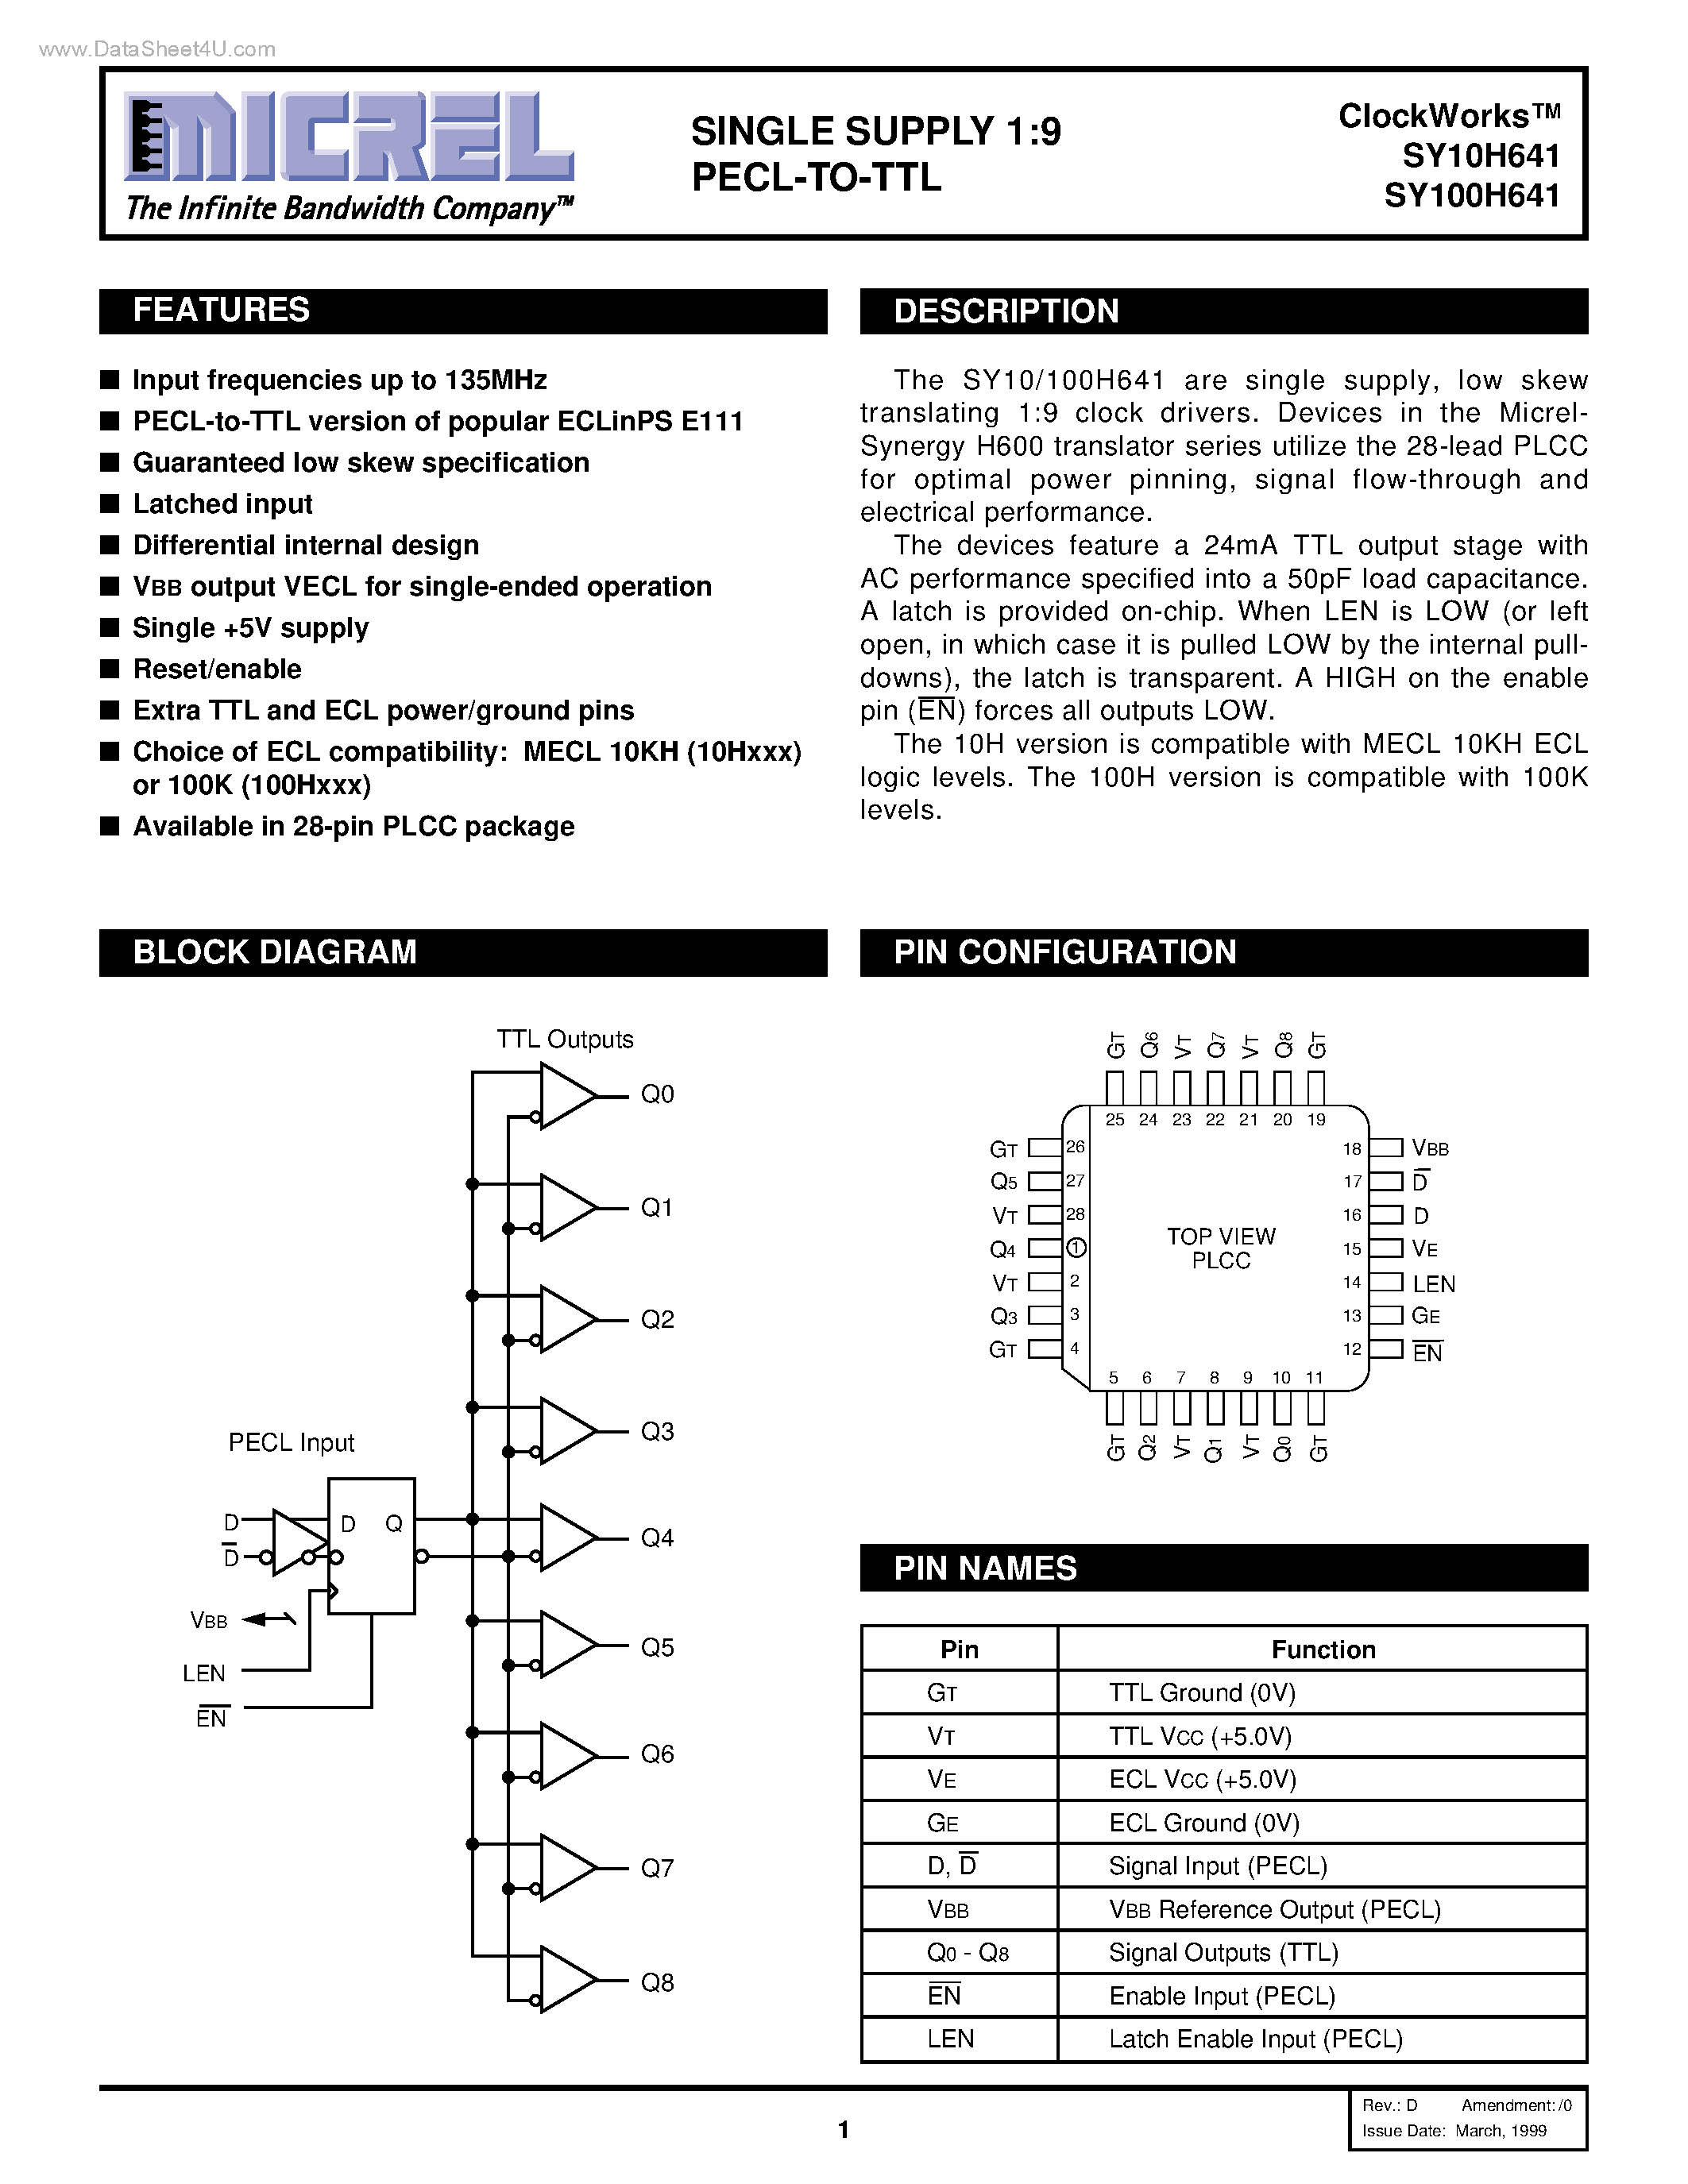 Datasheet SY100H641 - SINGLE SUPPLY 1:9 PECL-TO-TTL page 1